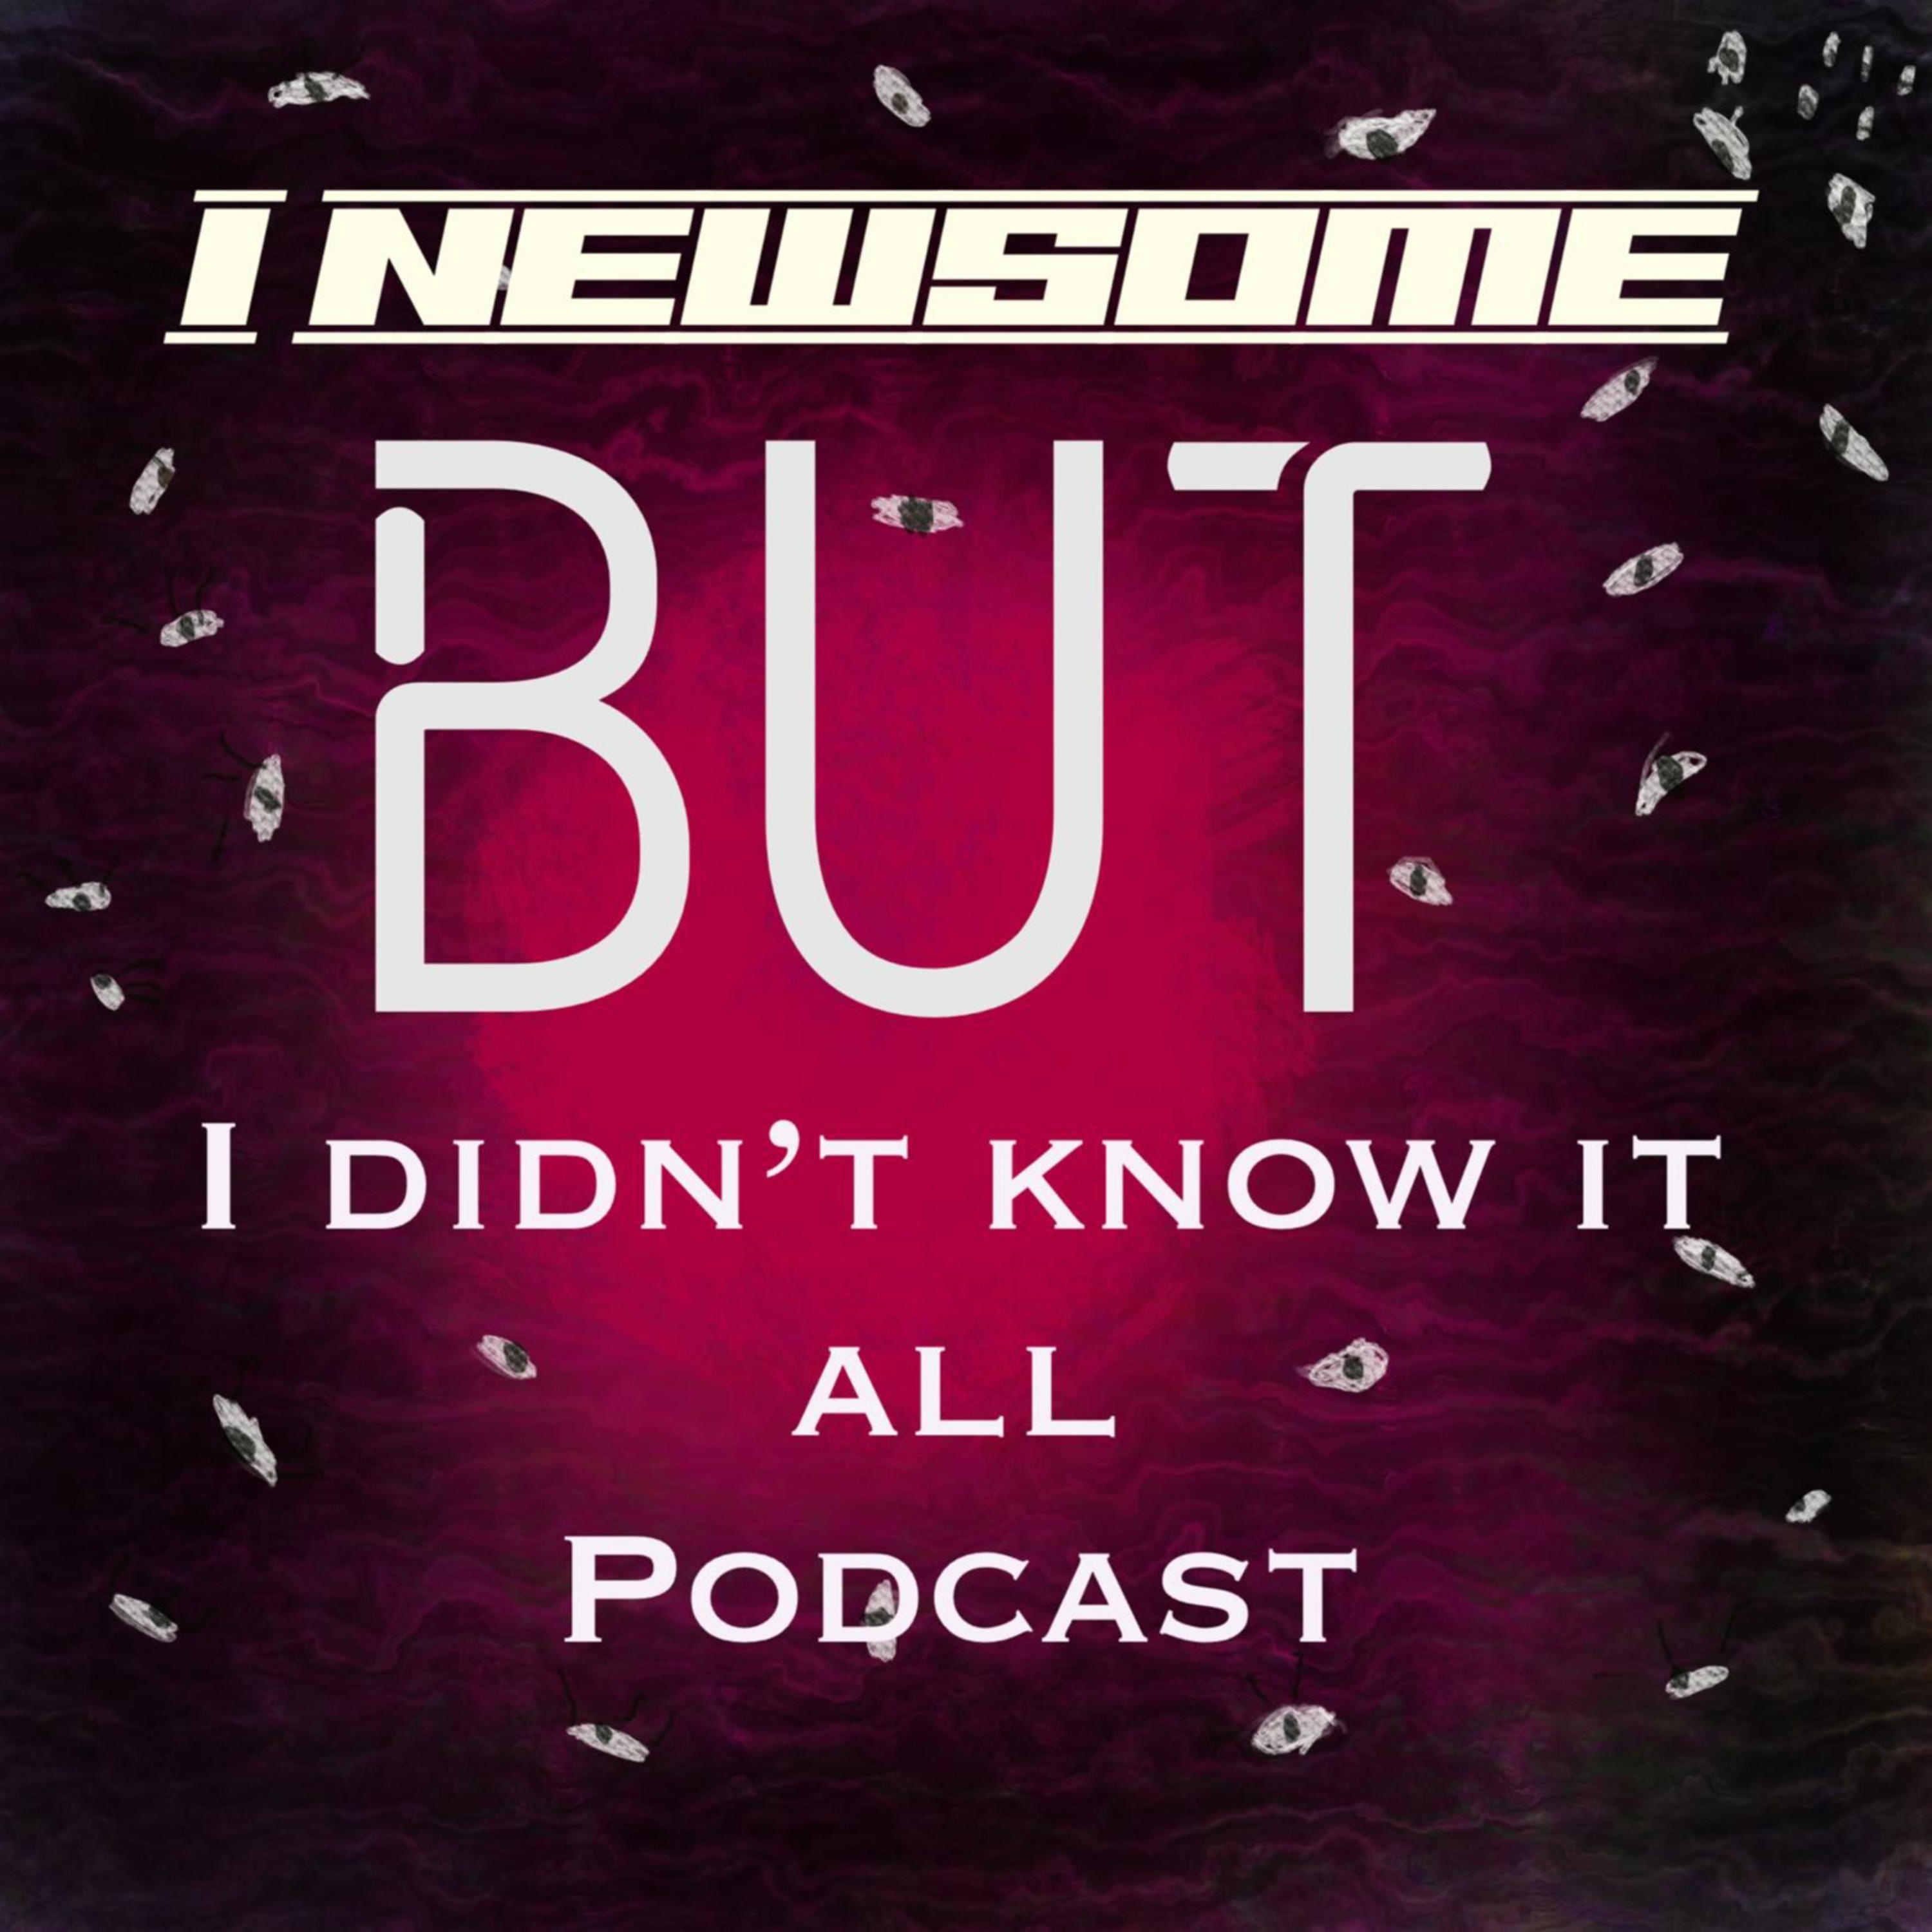 I Newsome But I Didn’t Know It All Podcast